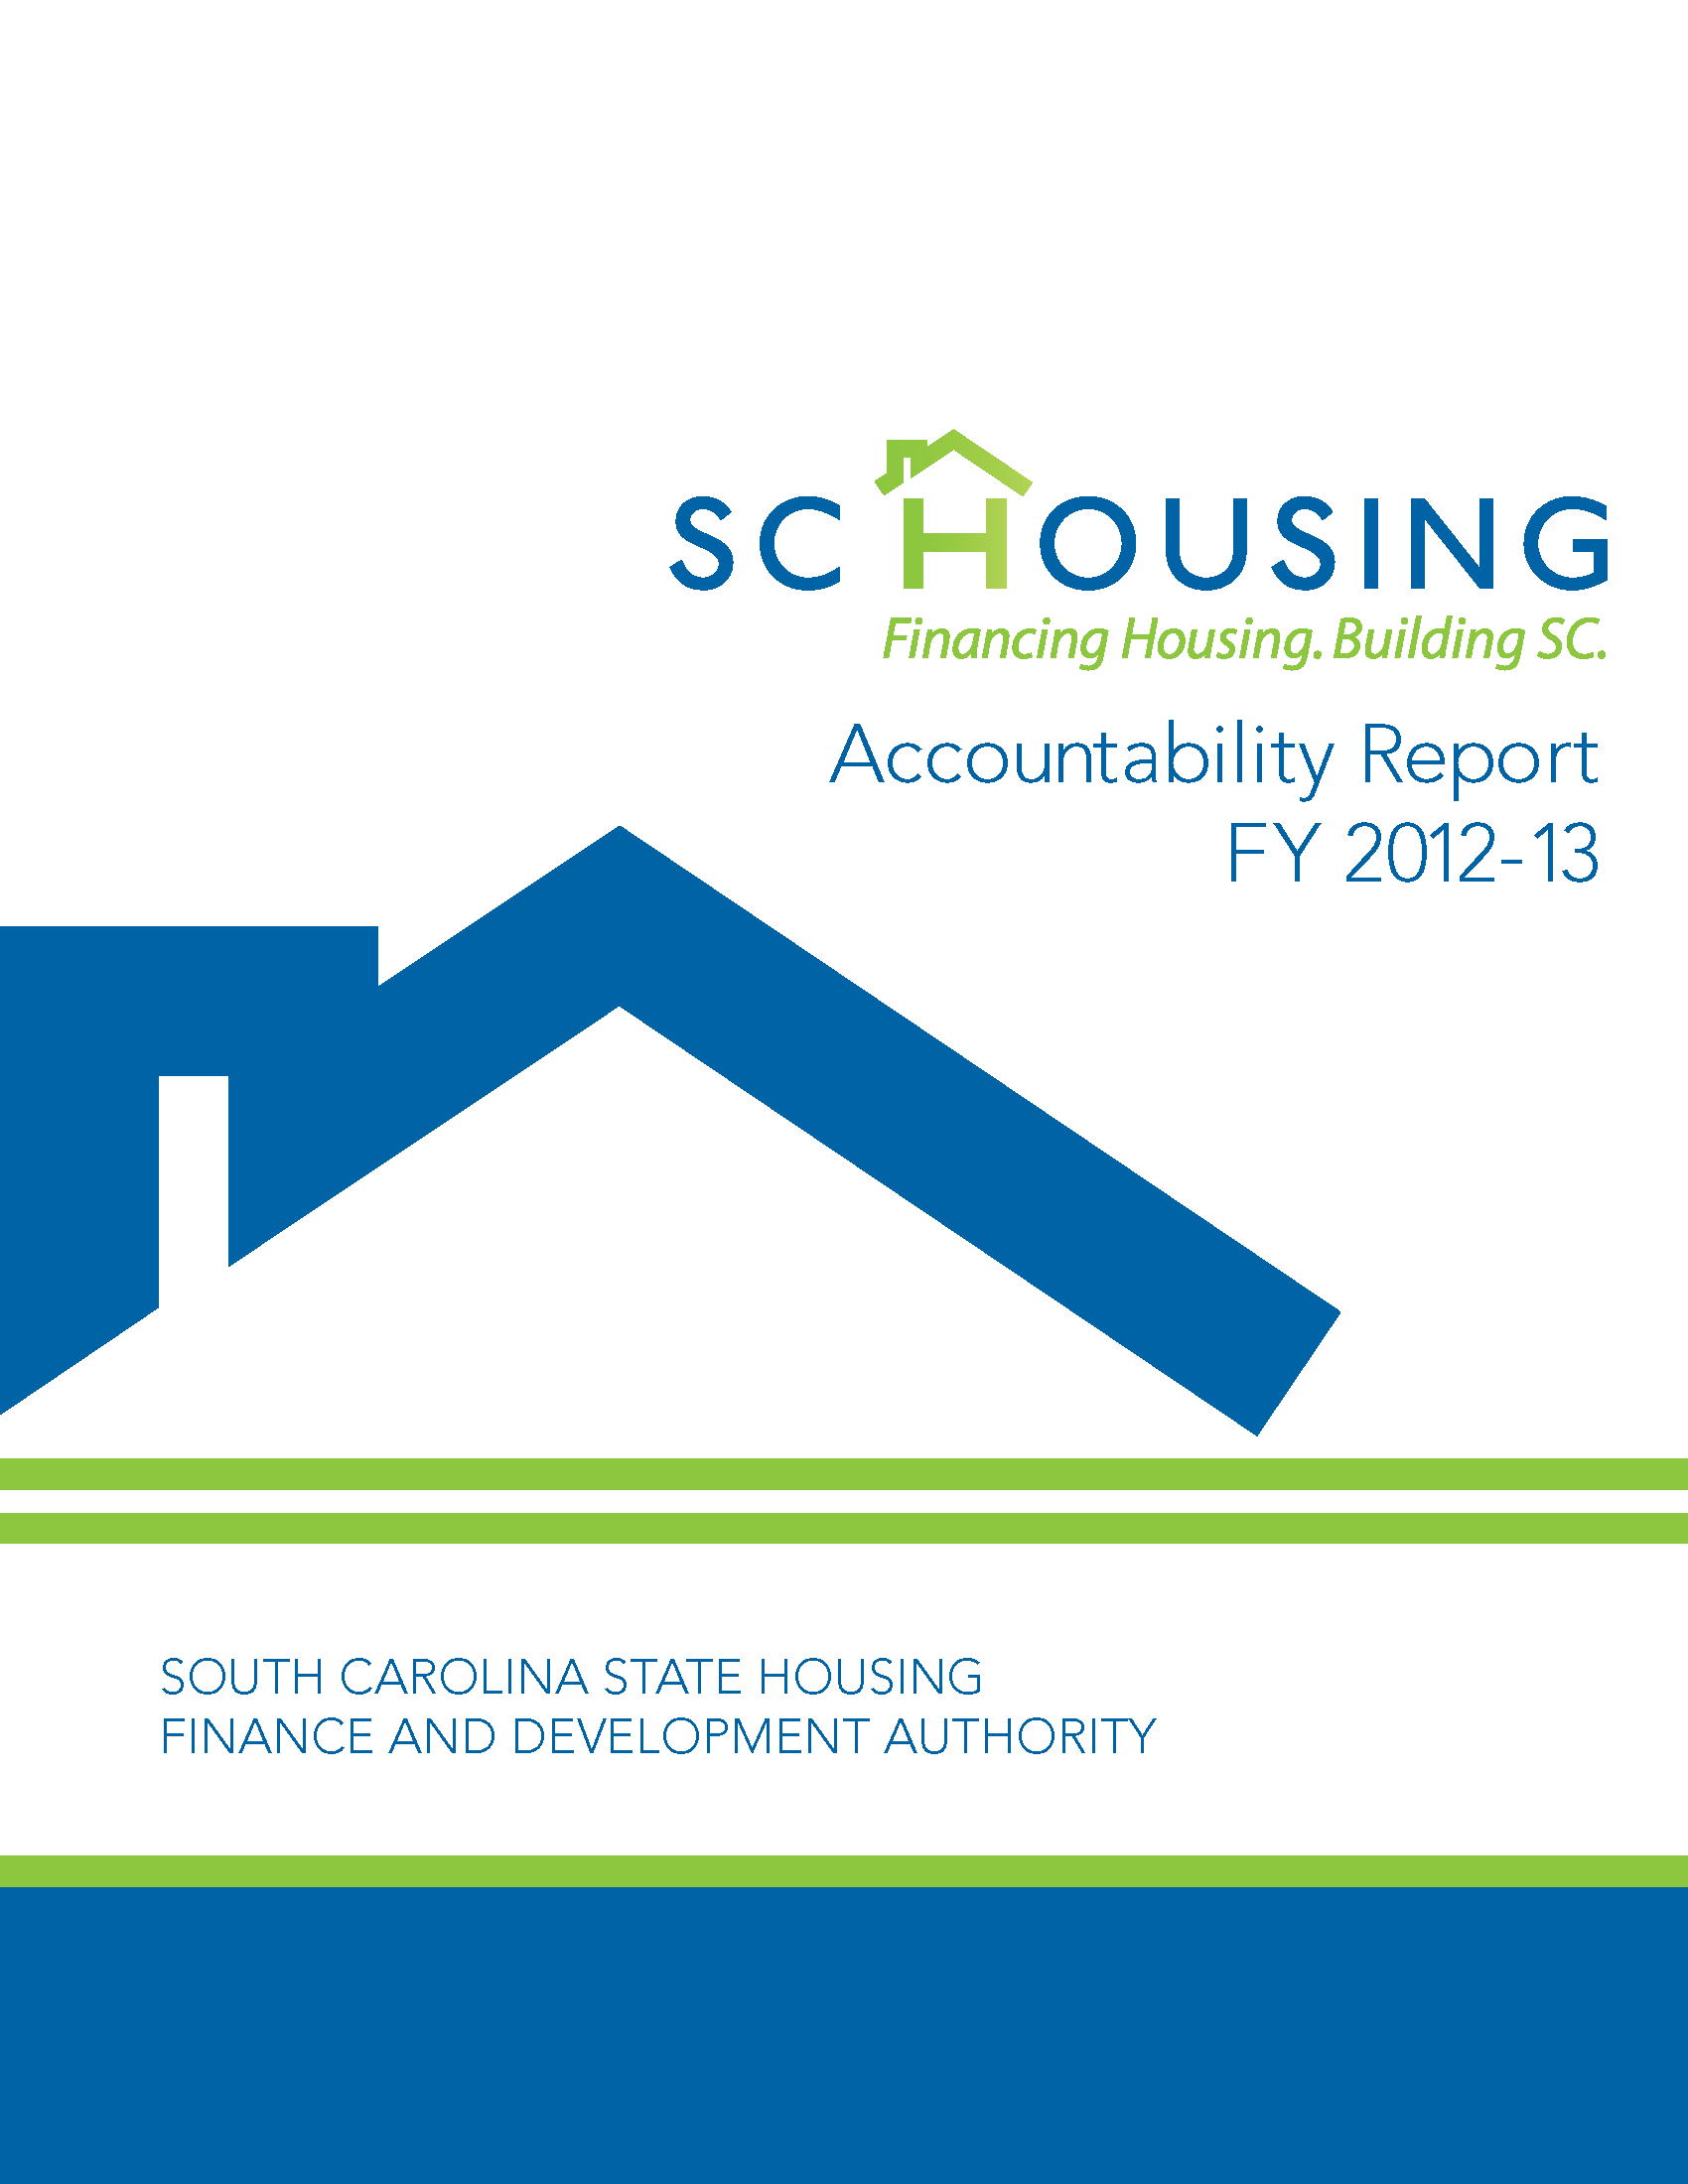 Accountability Report for Fiscal Year 2013